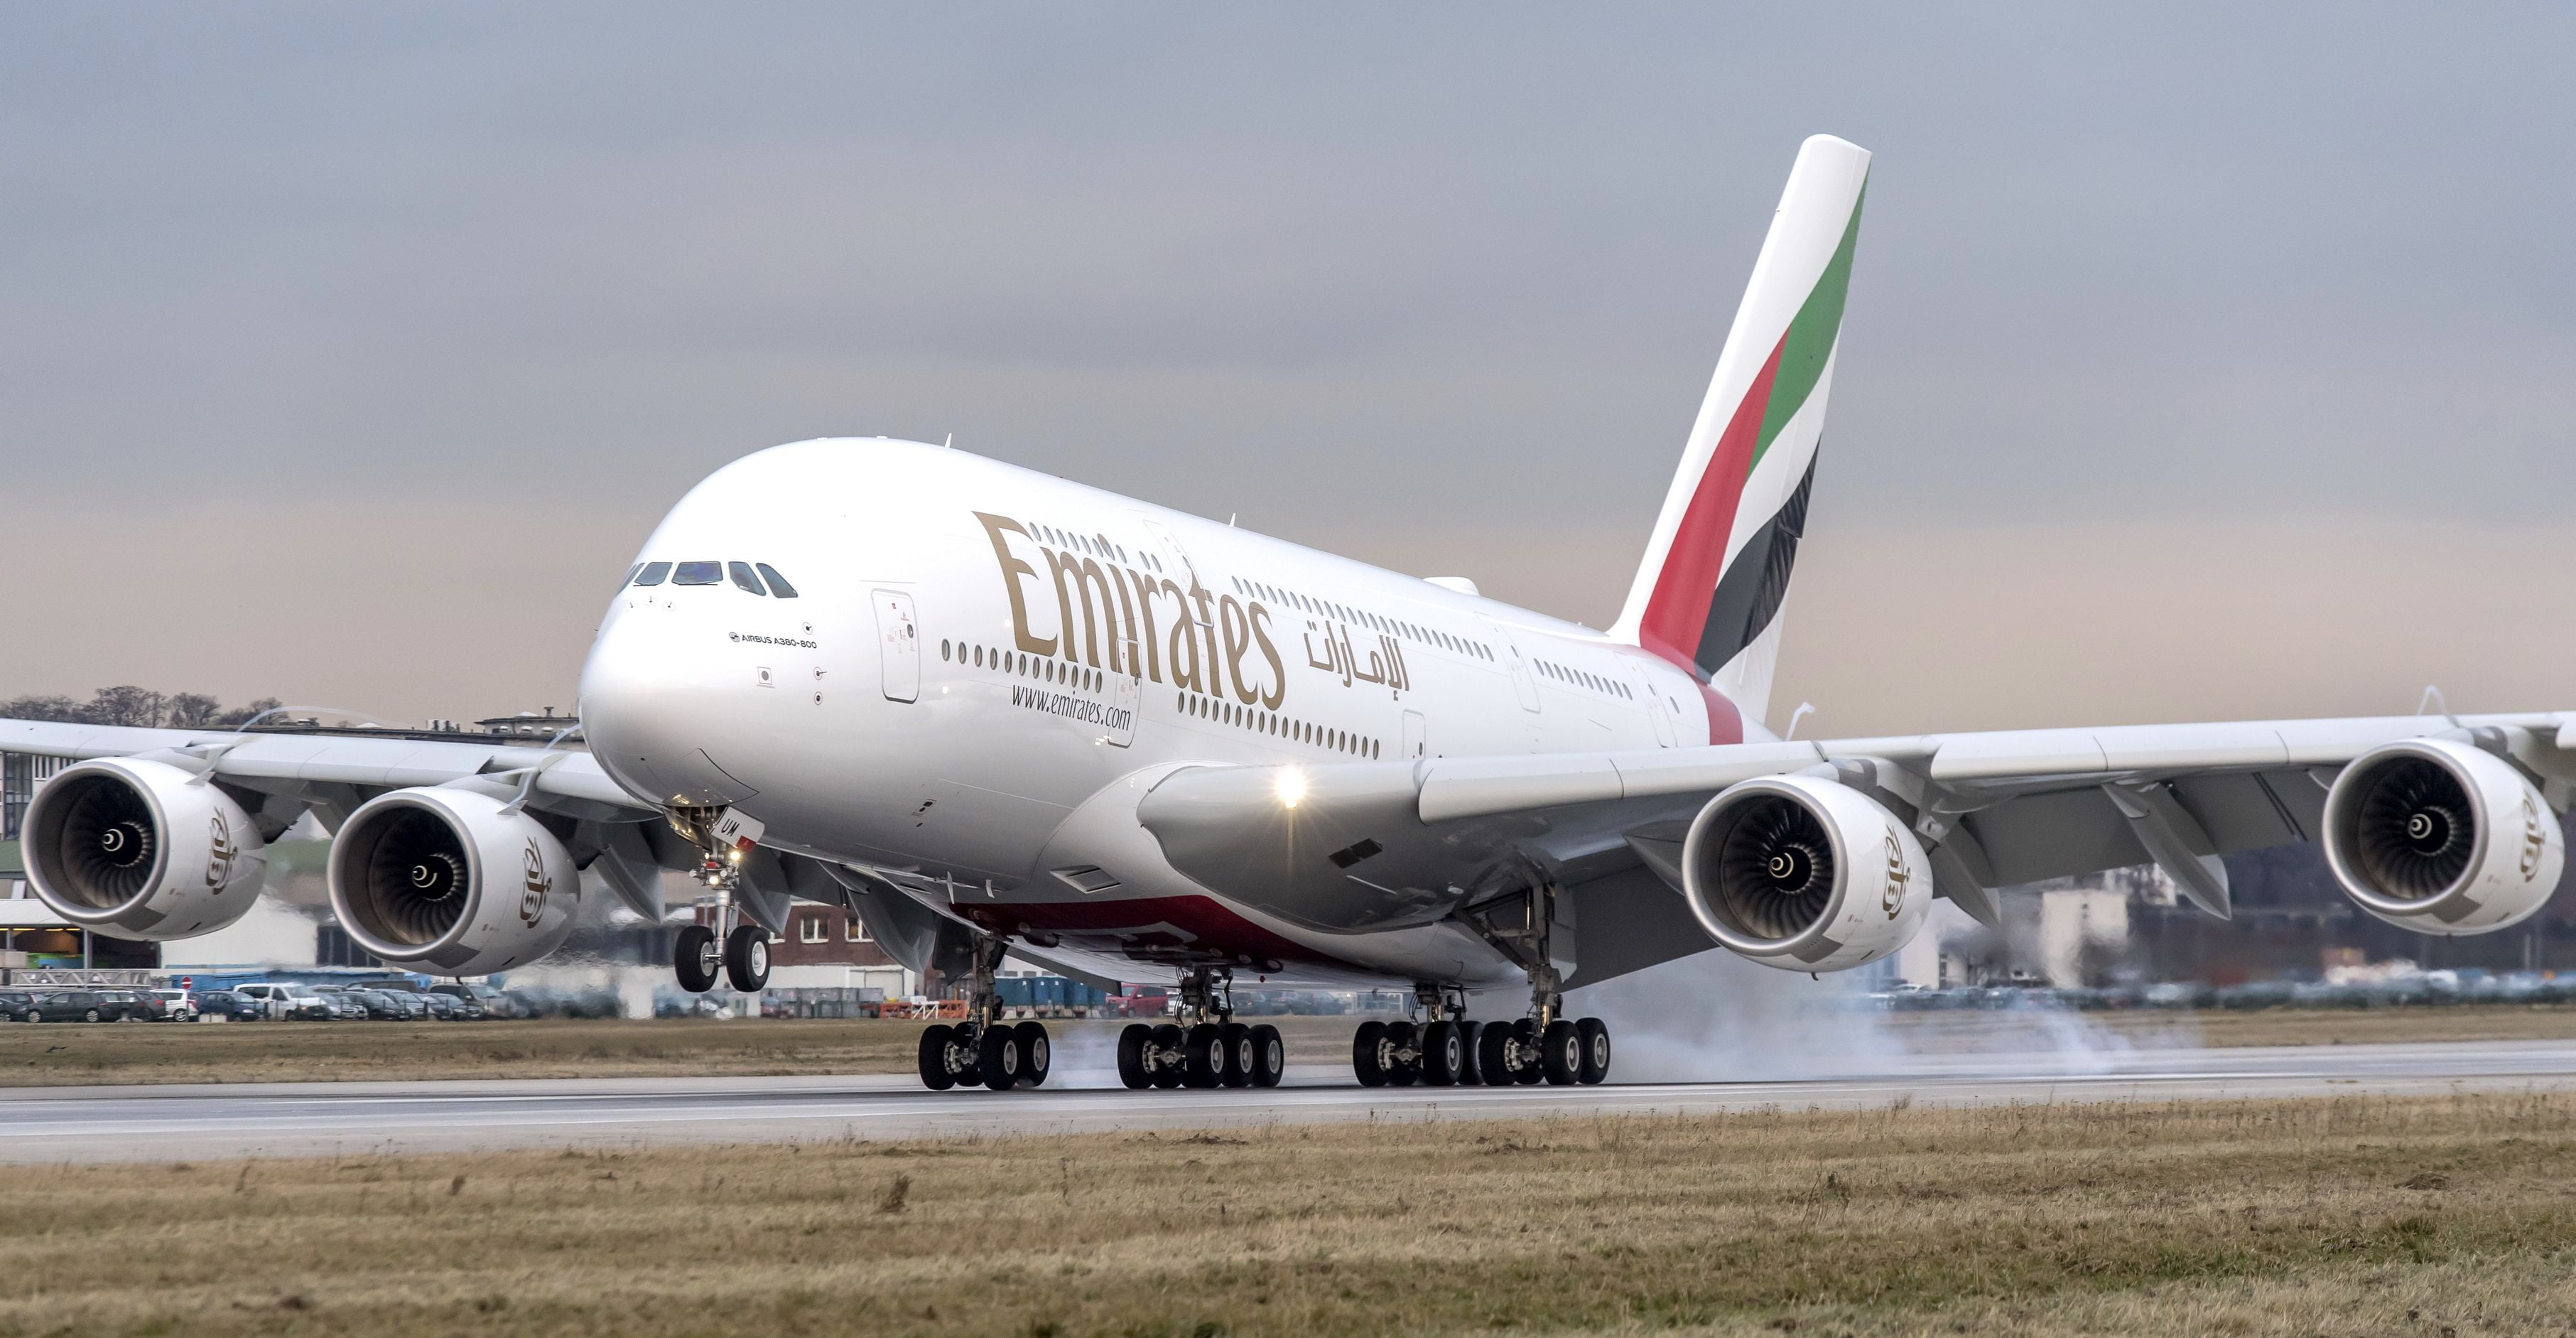 Smoke, A380, Landing, Airbus, WFP, Chassis, Airbus A380, Emirates Airlines